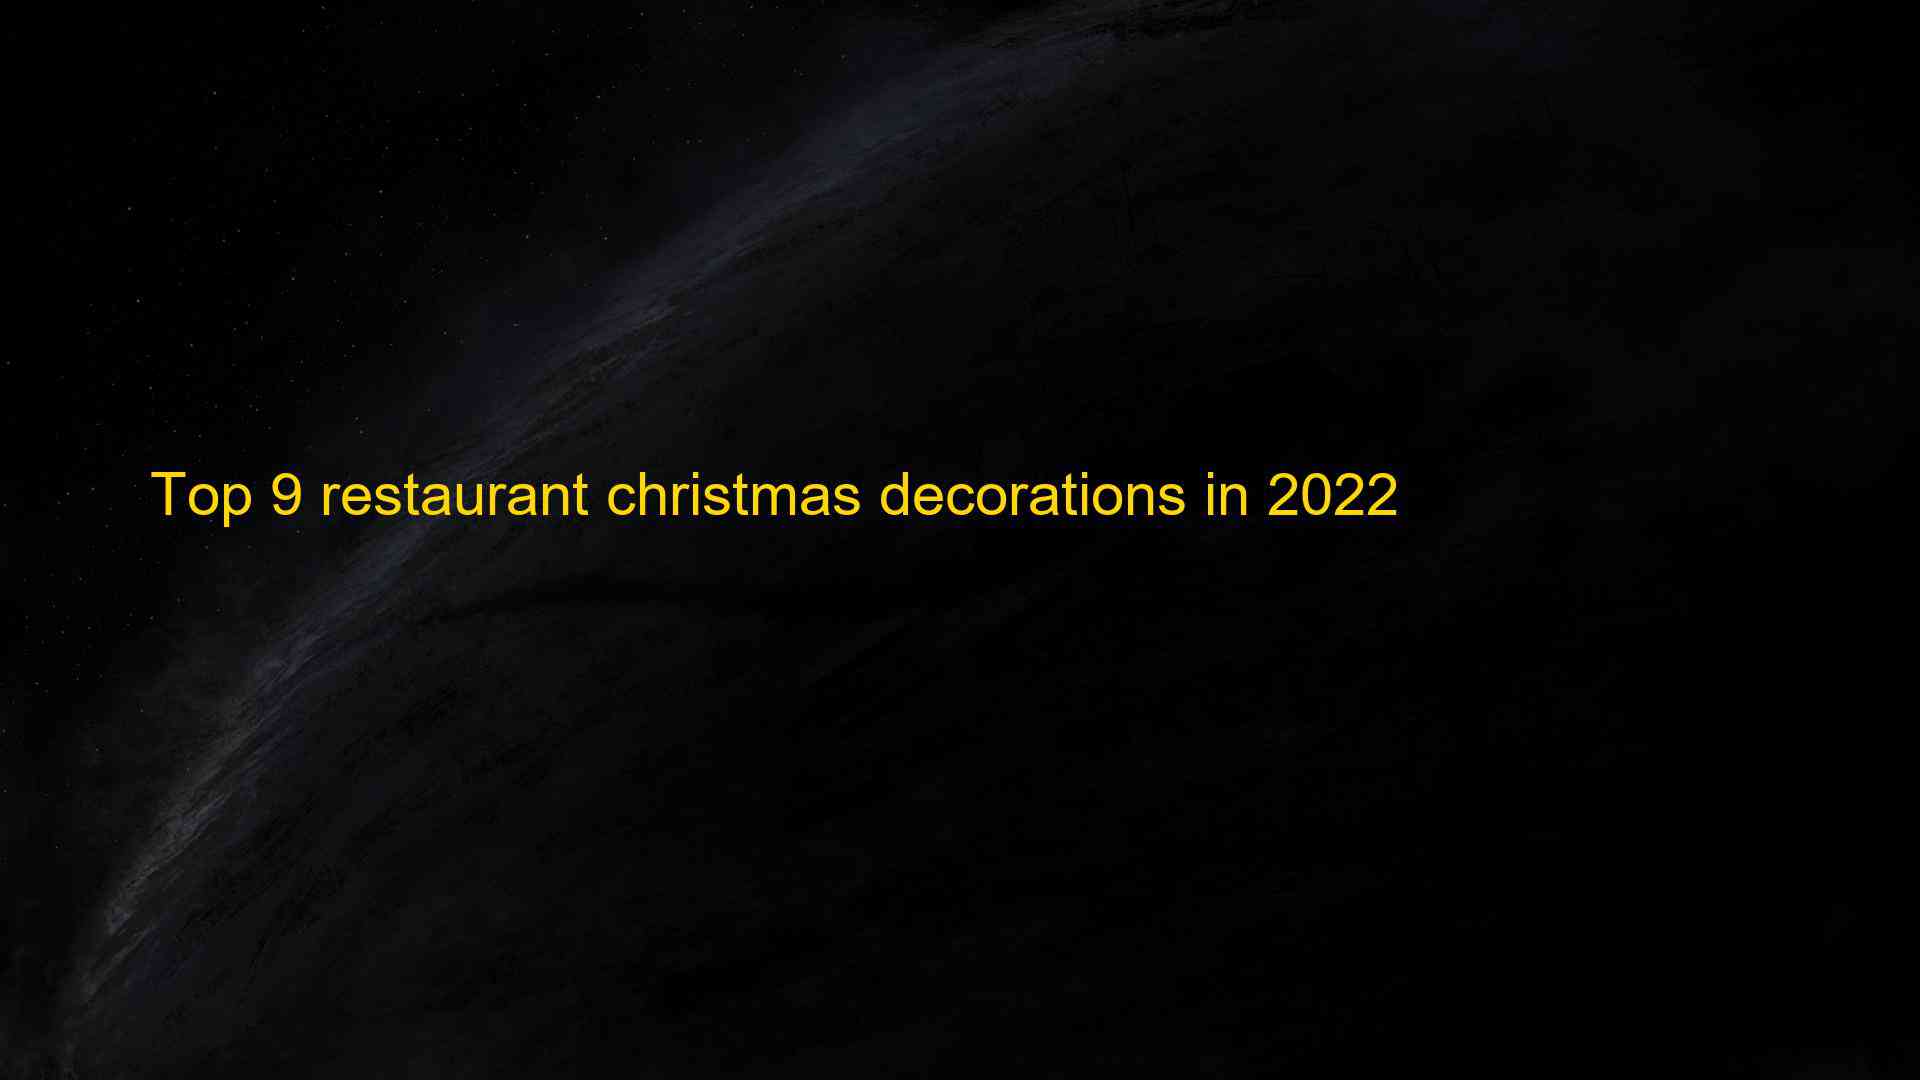 Top 9 restaurant christmas decorations in 2022 1663541797